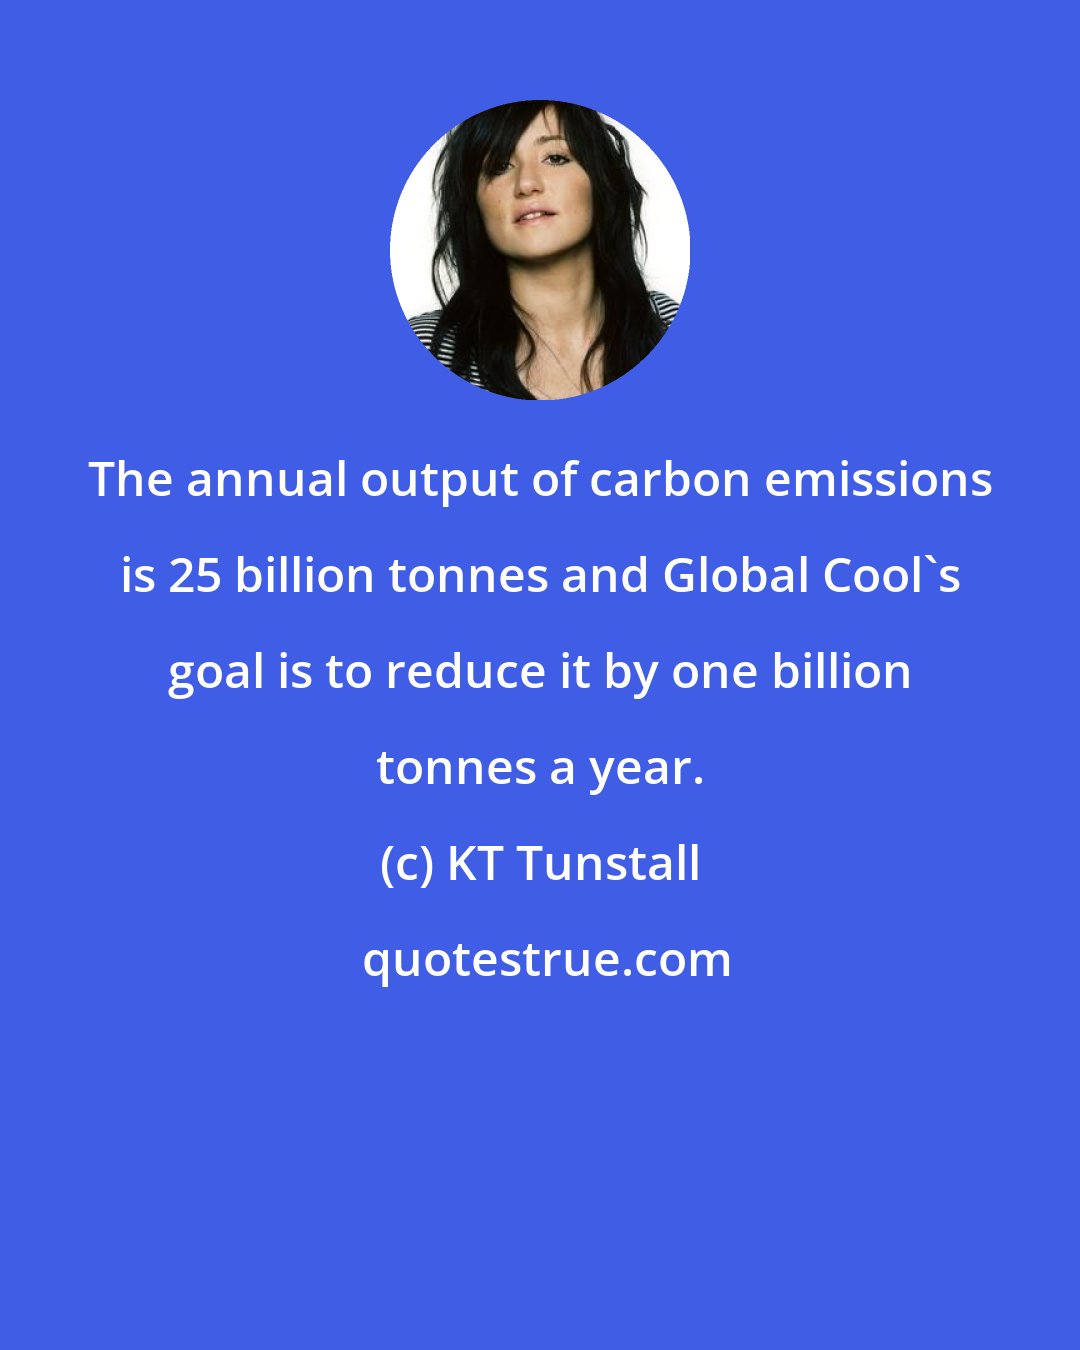 KT Tunstall: The annual output of carbon emissions is 25 billion tonnes and Global Cool's goal is to reduce it by one billion tonnes a year.